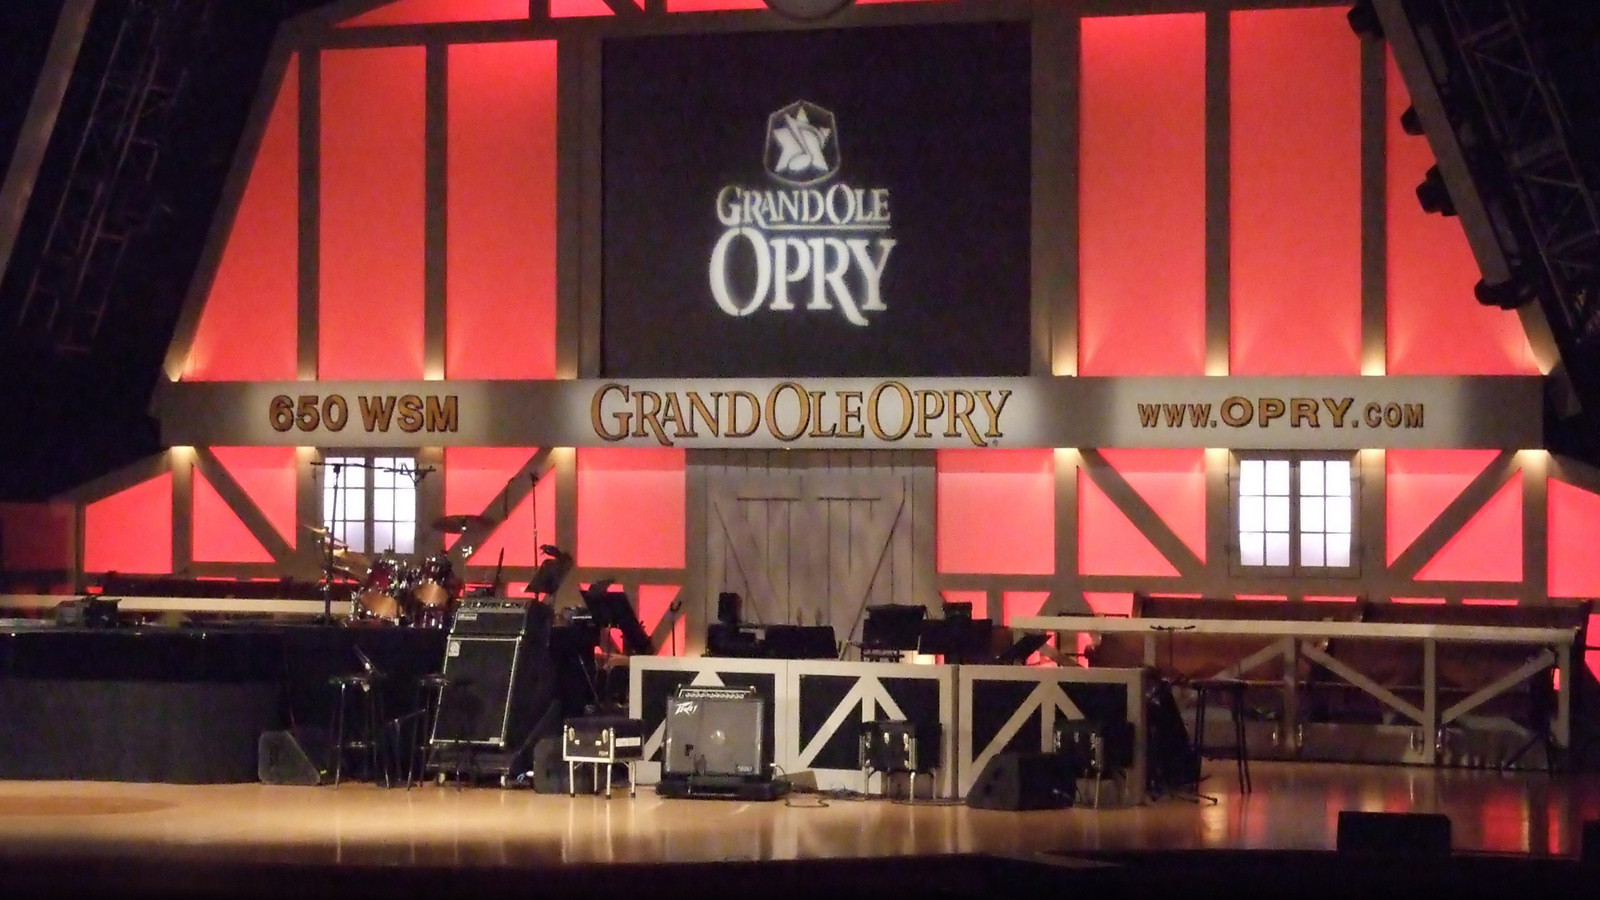 The Legendary Grand Ole Opry - Home Of Country Music